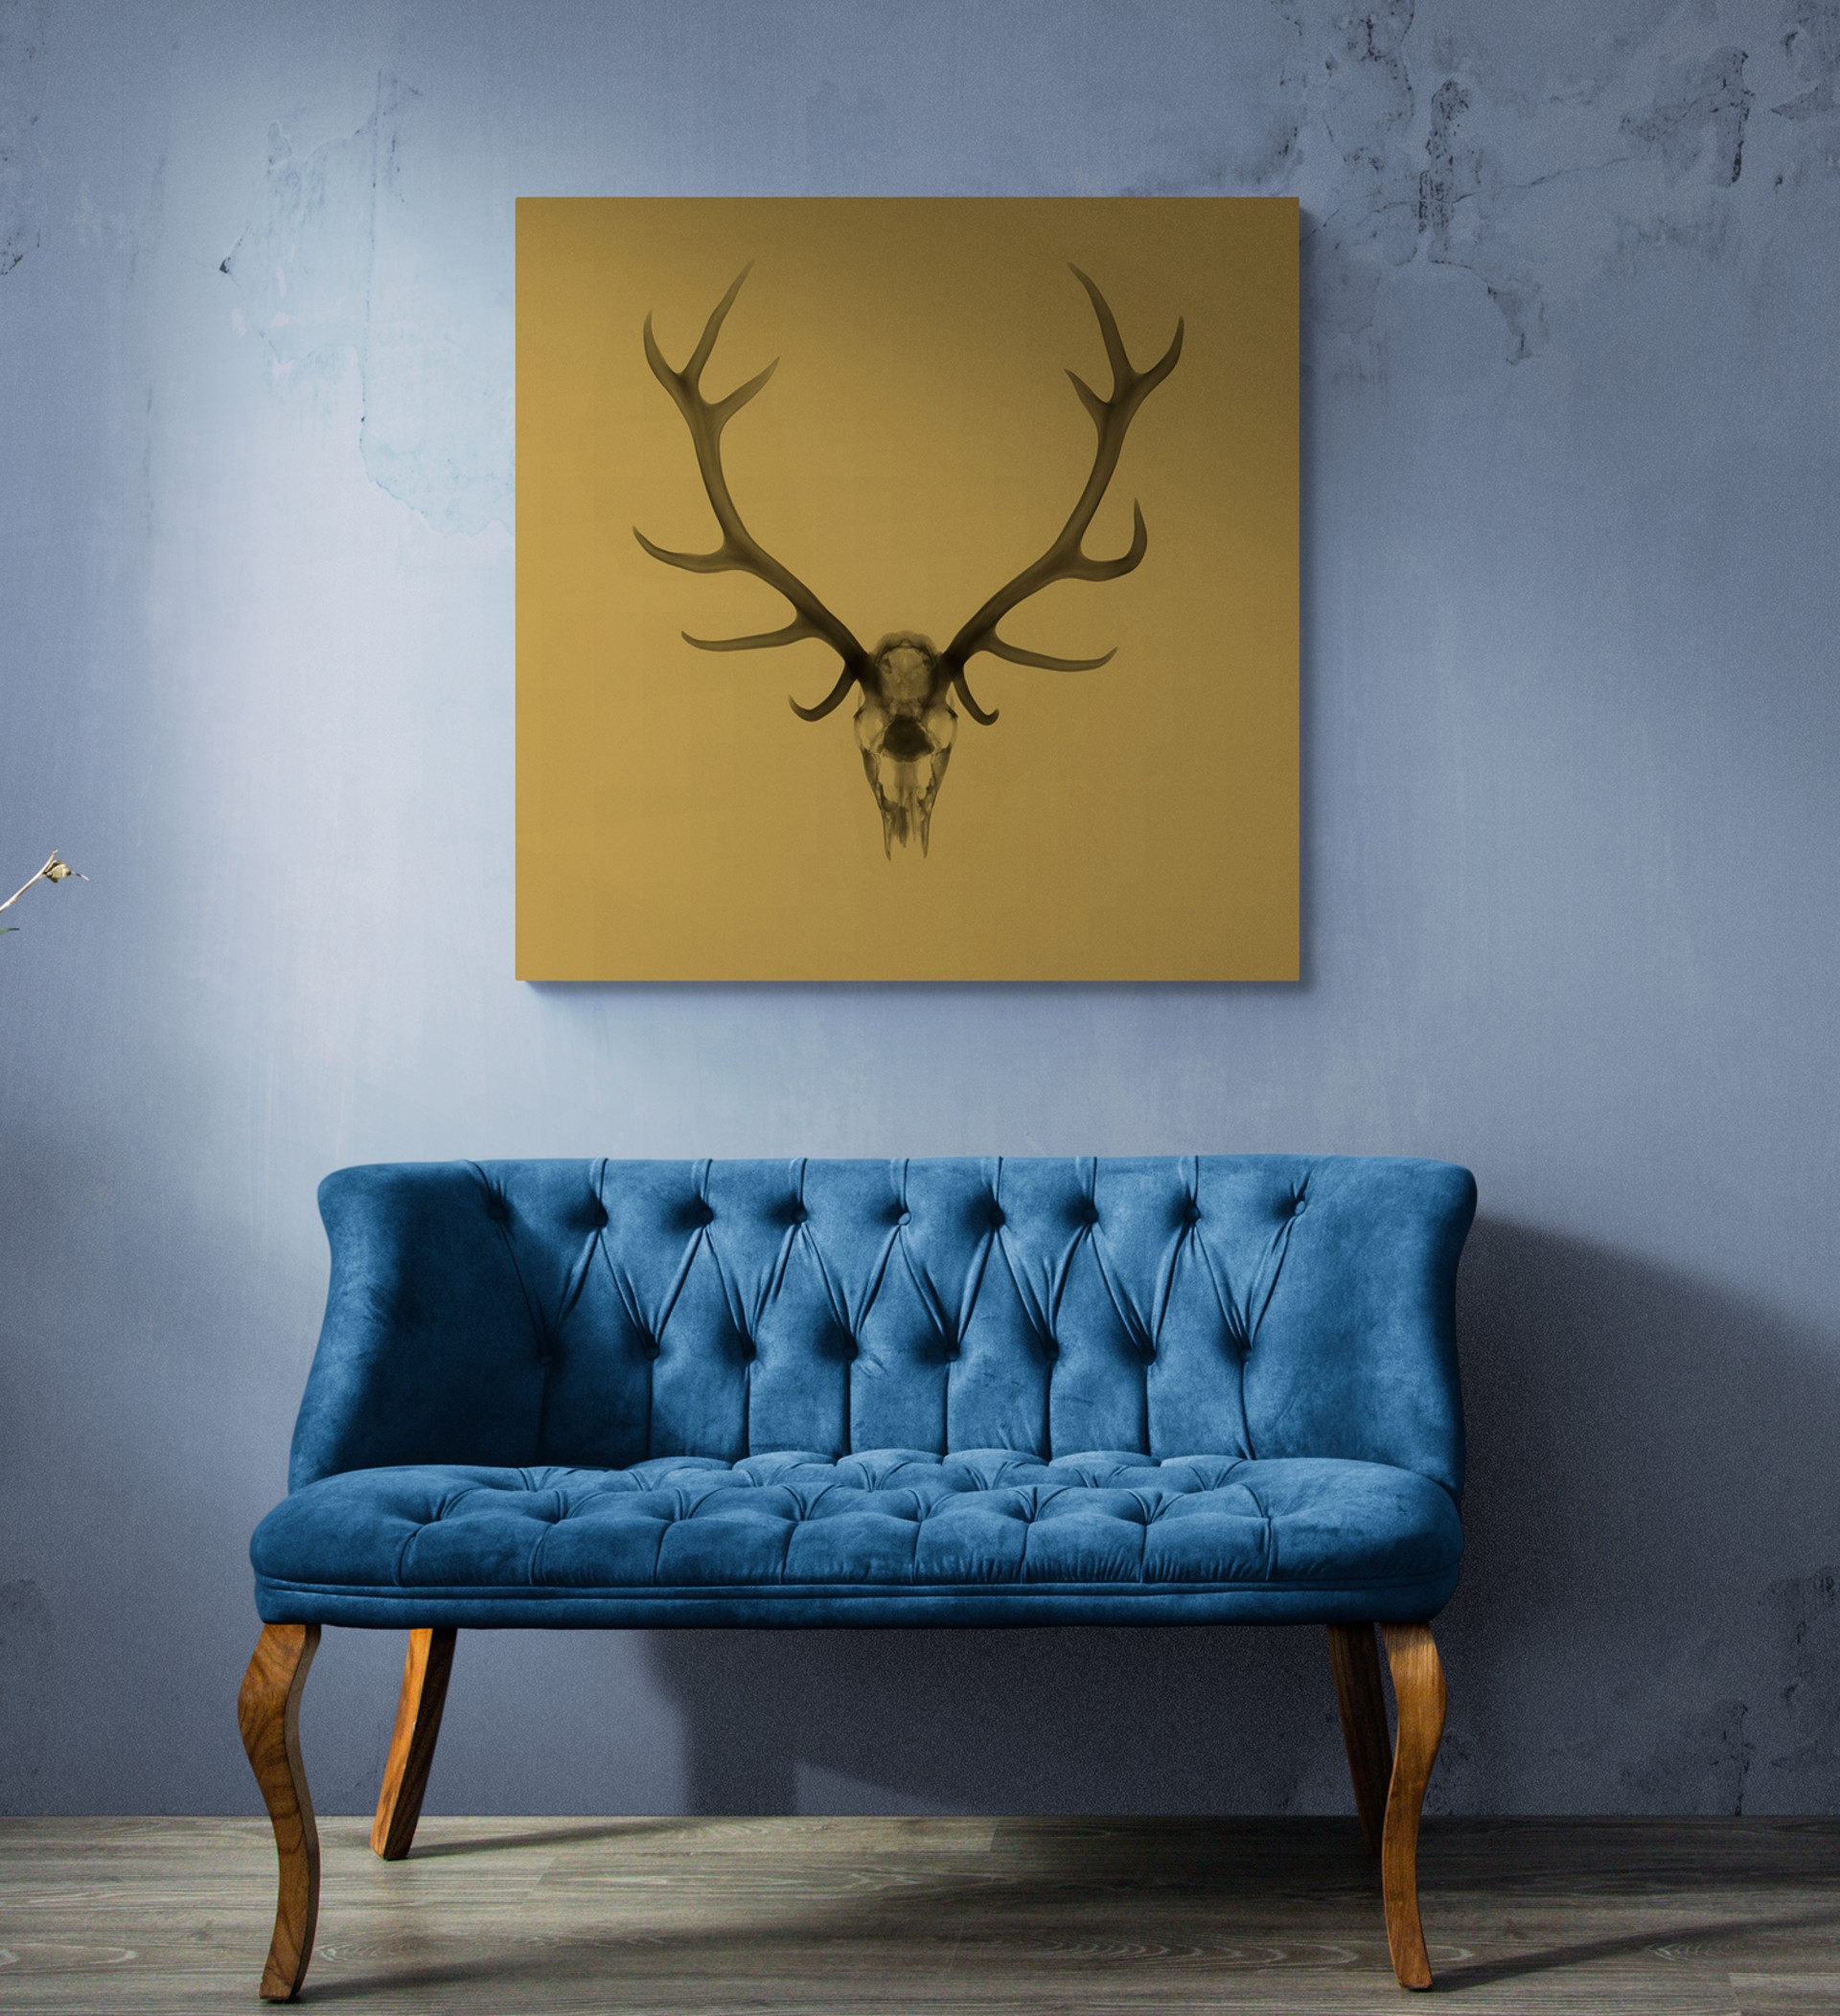 Antlers - Gold by Nick Veasey